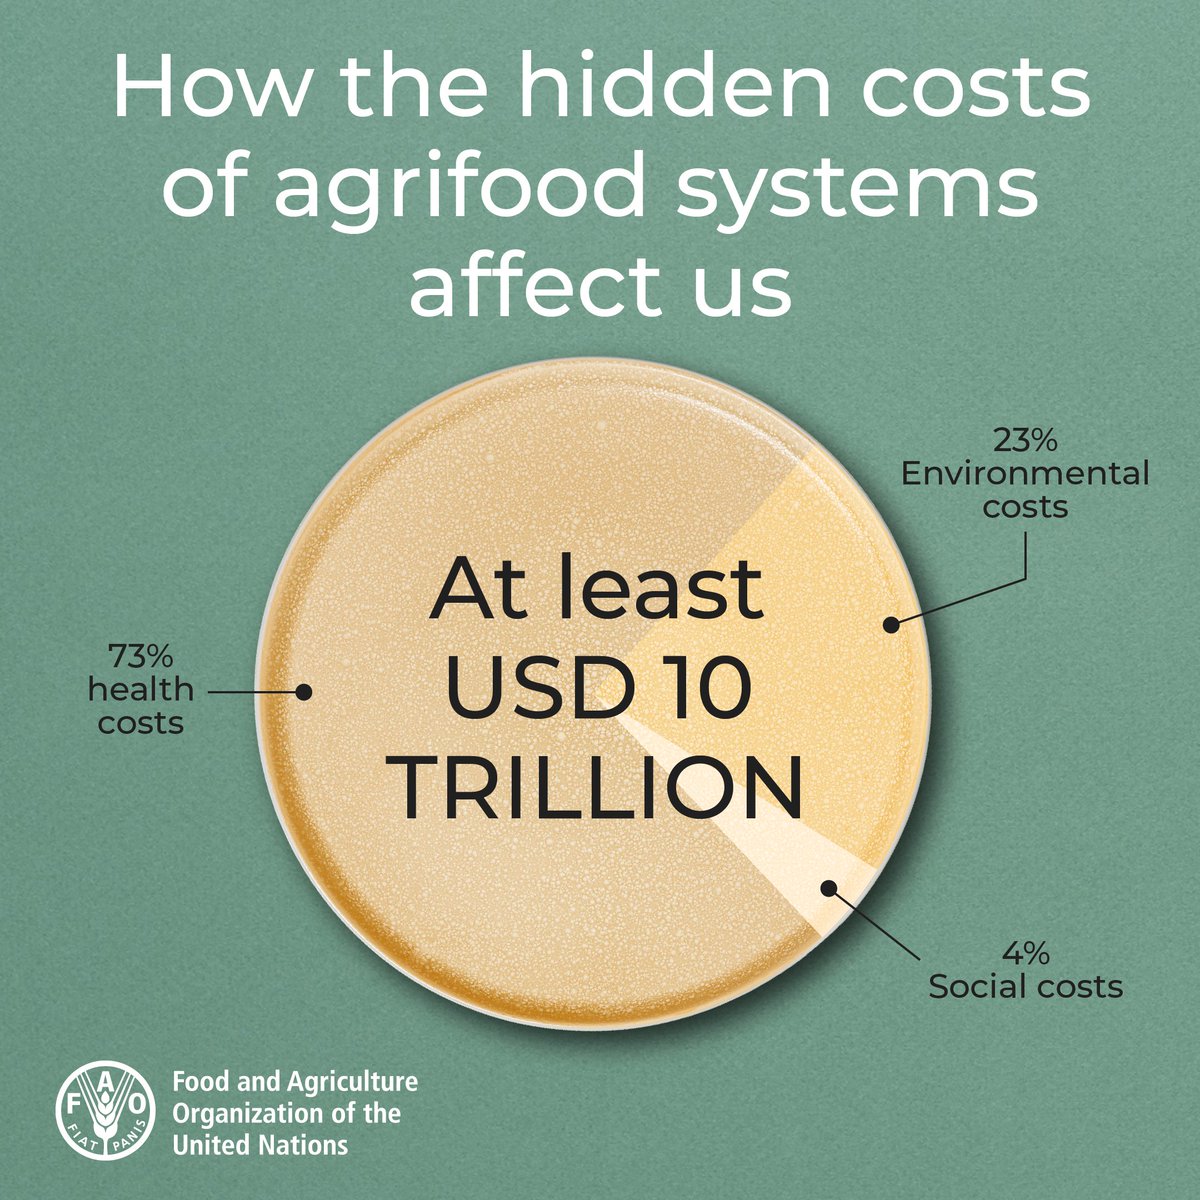 Agrifood systems have hidden costs. We all pay them, but not equally. 

For the first time, @FAO calculated the environmental, health and social hidden costs in agrifood systems for 154 countries.

Read more to learn about the #TrueCostofFood: bit.ly/3MvBViS